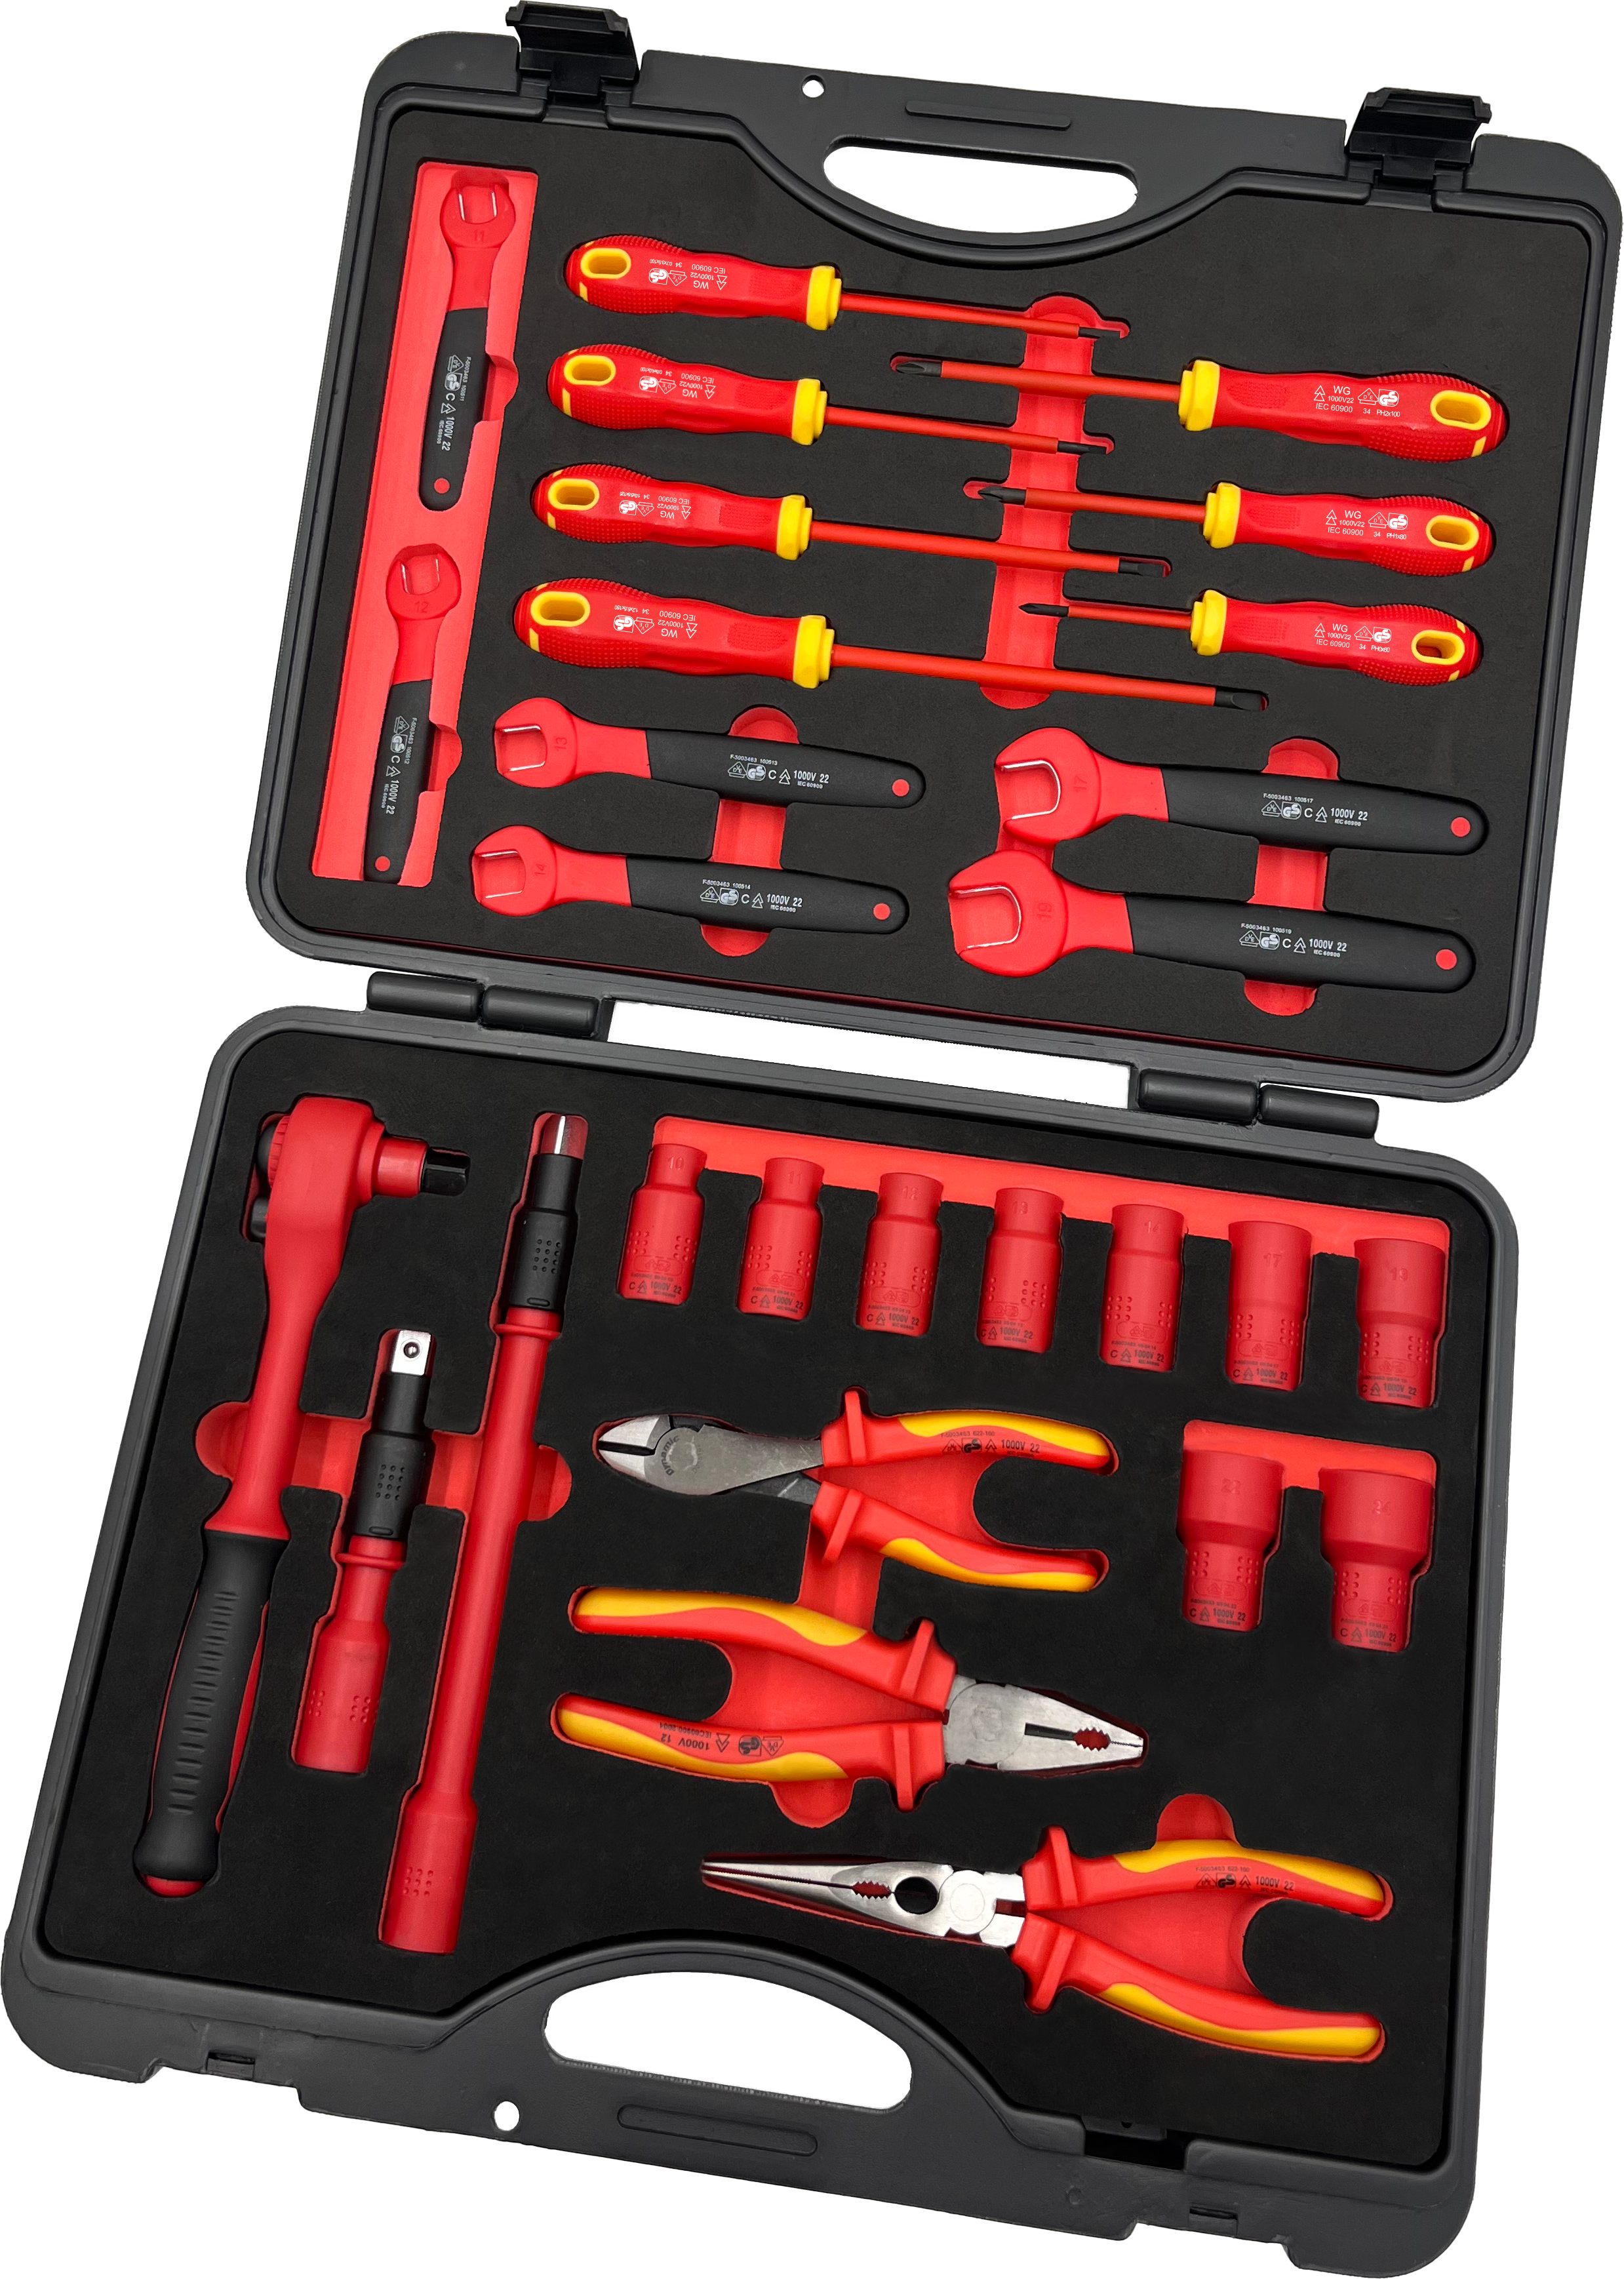 28 PCS INSULATED SCREWDRIVERS AND PLIERS SET